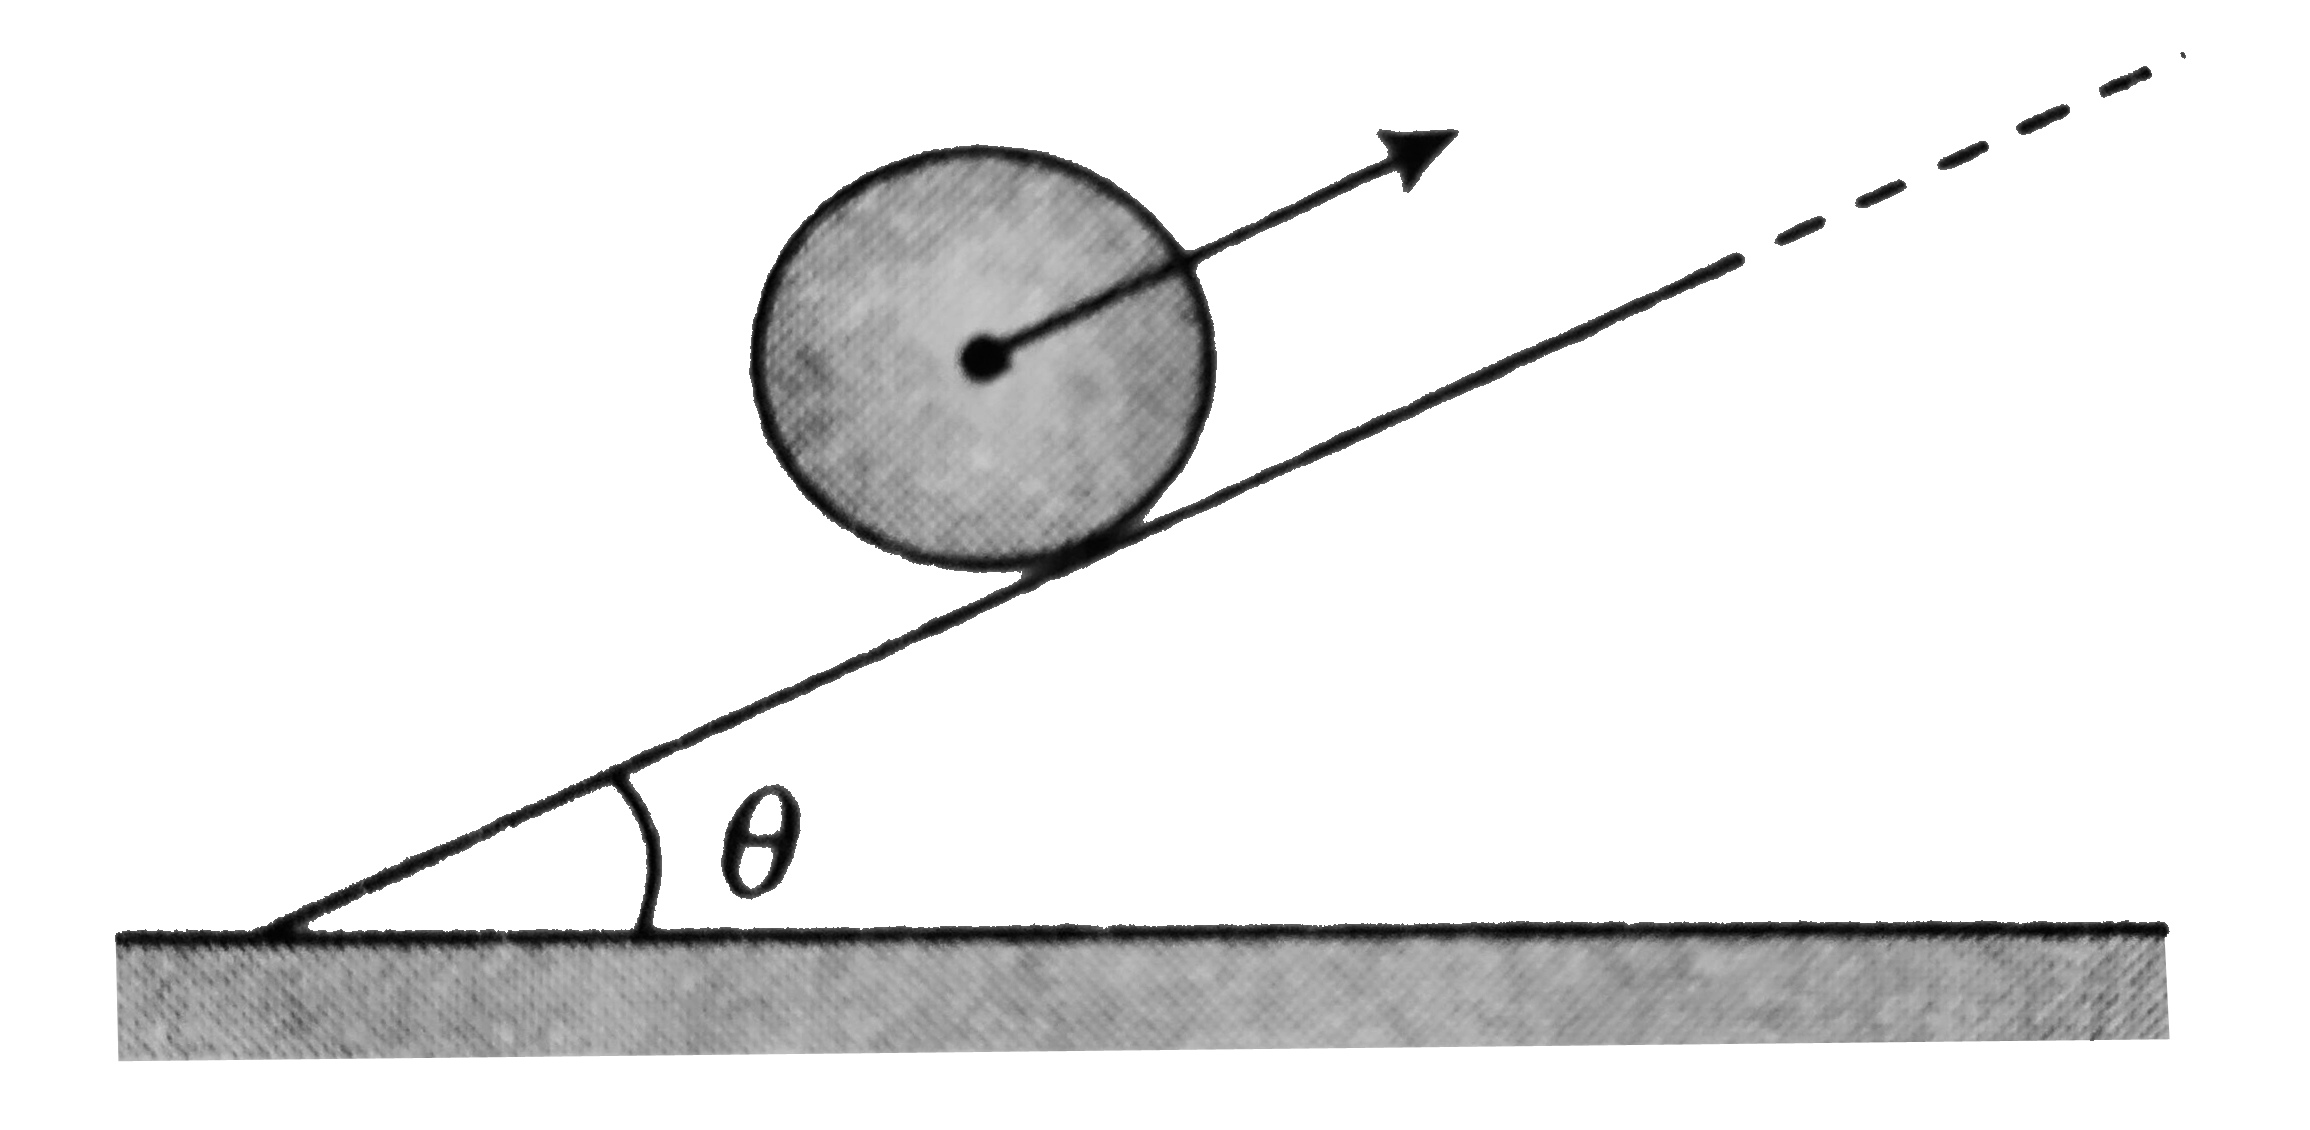 A uniform solid sphere rolls up (witout slipping) the fixed inclined plane, and then back down. Which is the correct graph of acceleration a of centre of mass of solid sphere as function of time t (for the duration sphere is on the incline)? Assume that the sphere rolling up has a positive velocity.